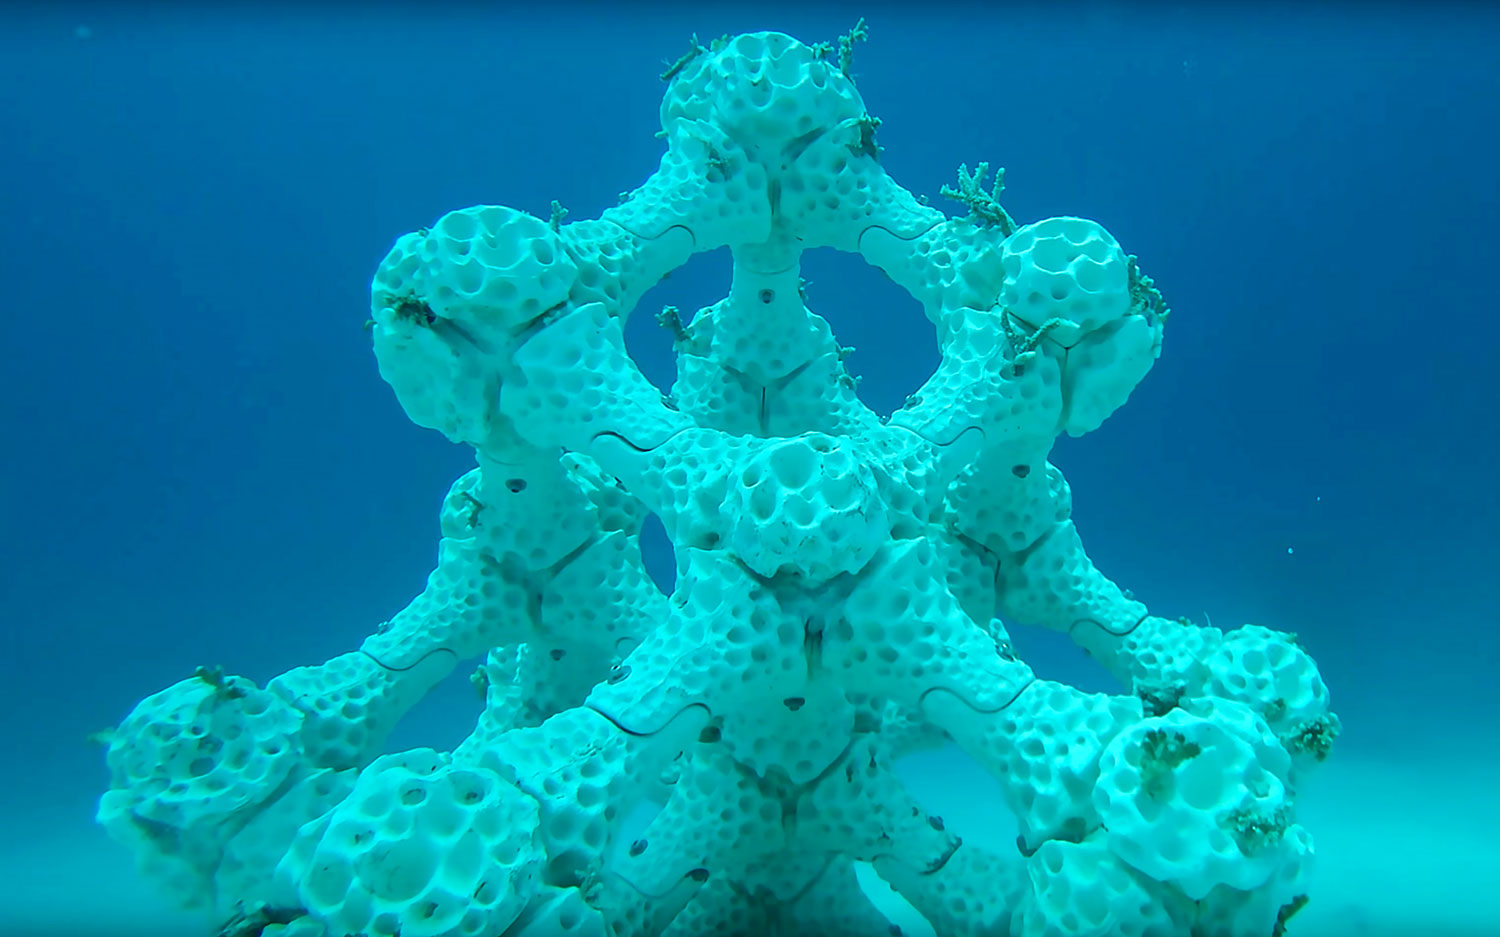 World’s Largest 3-D Printed Reef